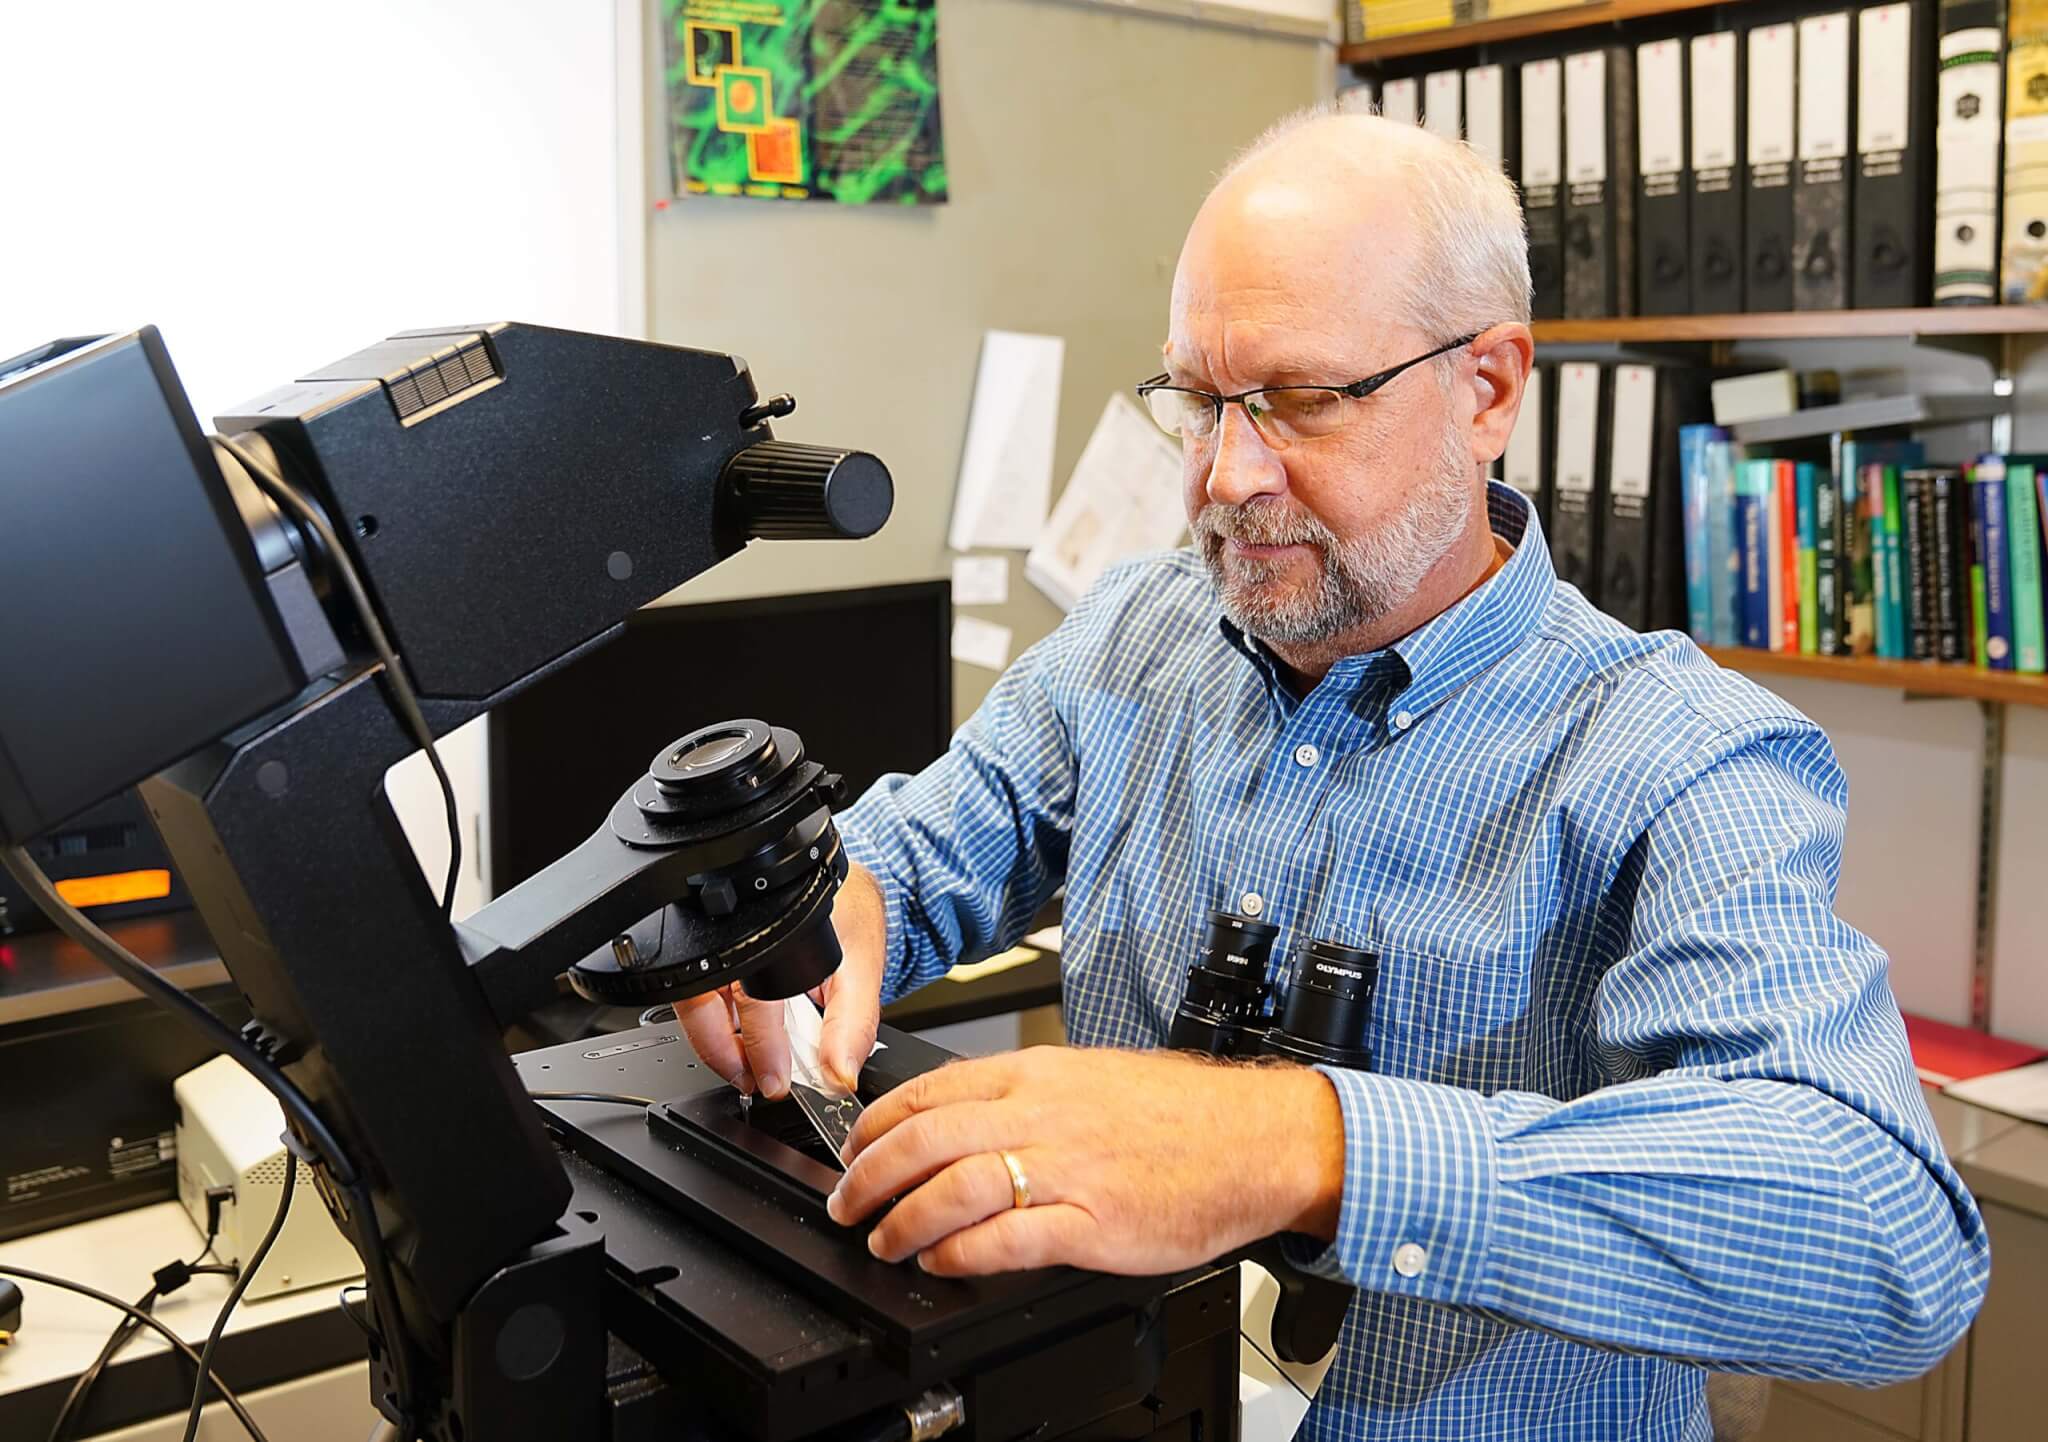 Staiger examining slide on microscope